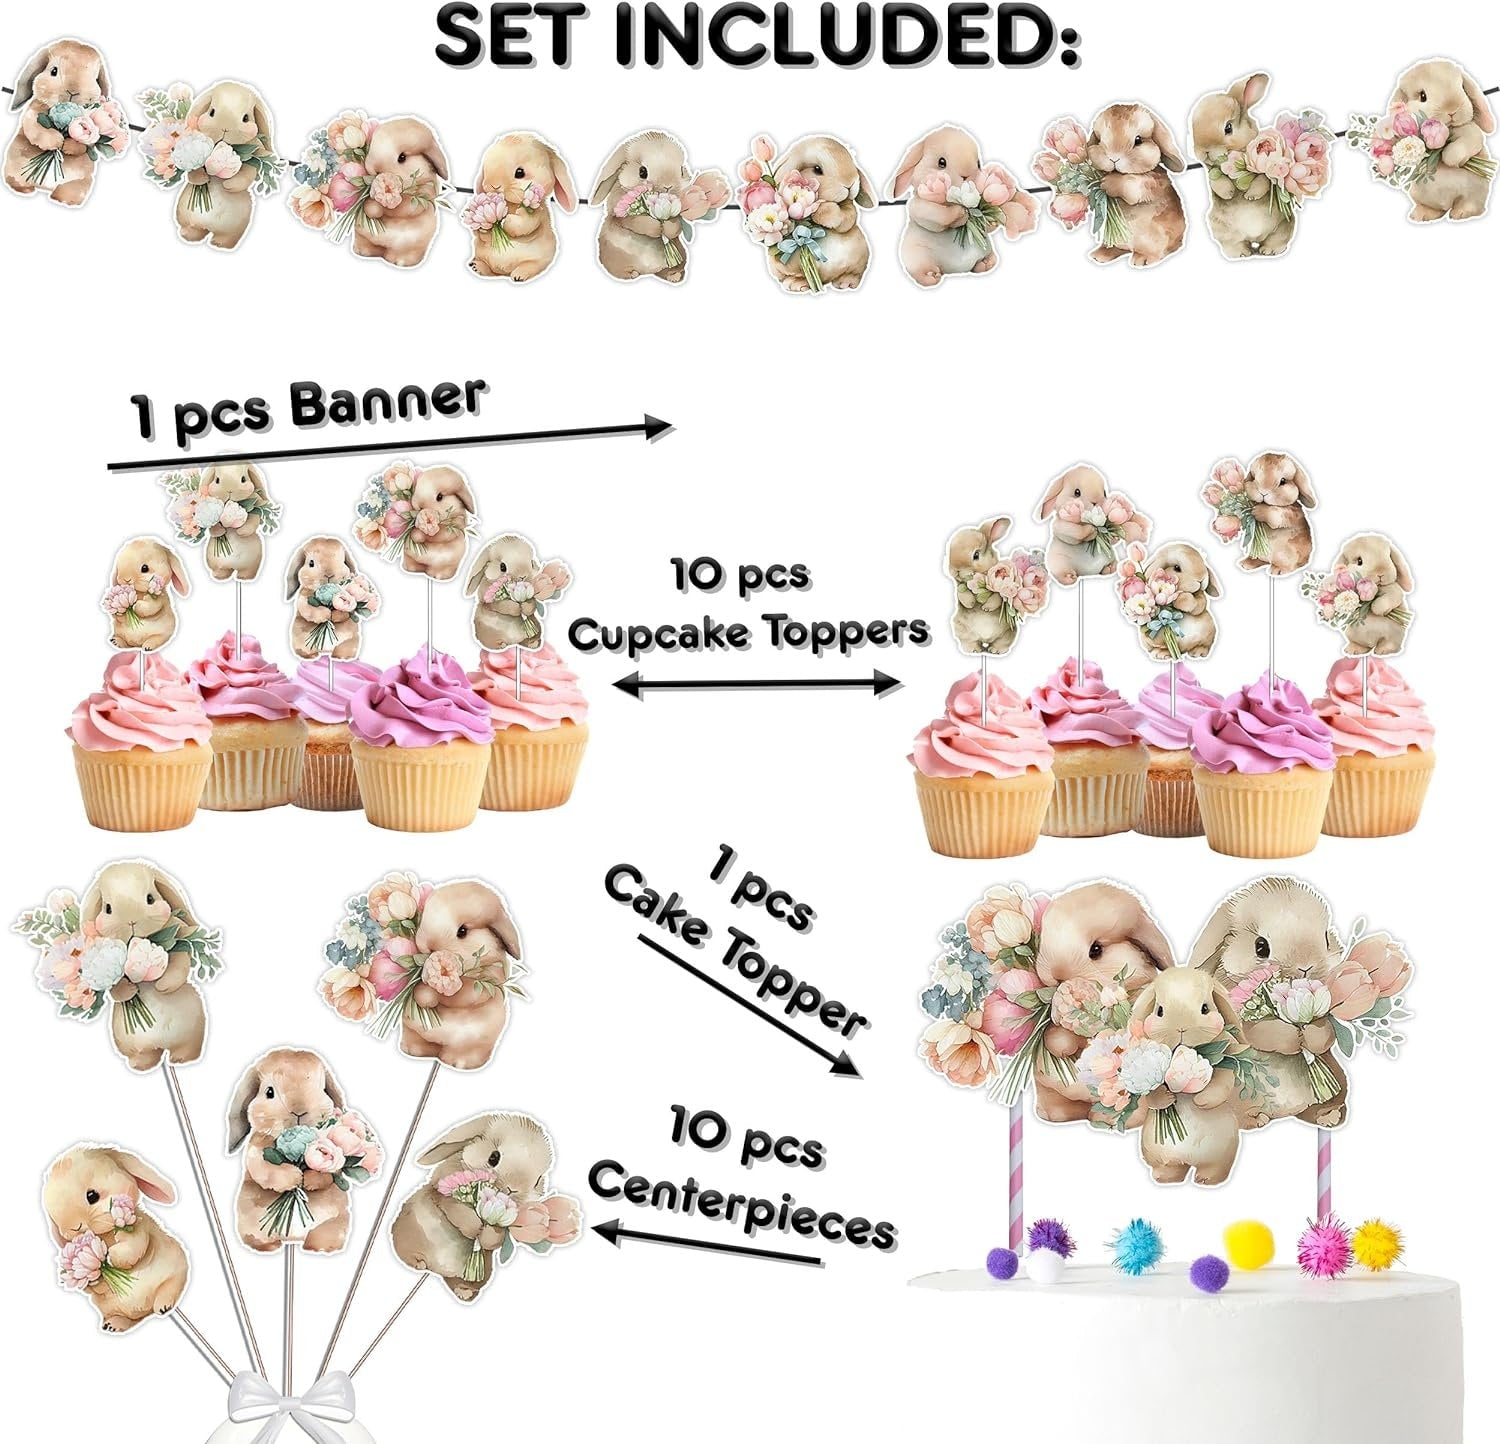 Little Bunny Baby Shower & Birthday Party Decor Set - Adorable Cake Topper, Cupcake Toppers, Centerpieces & Banner